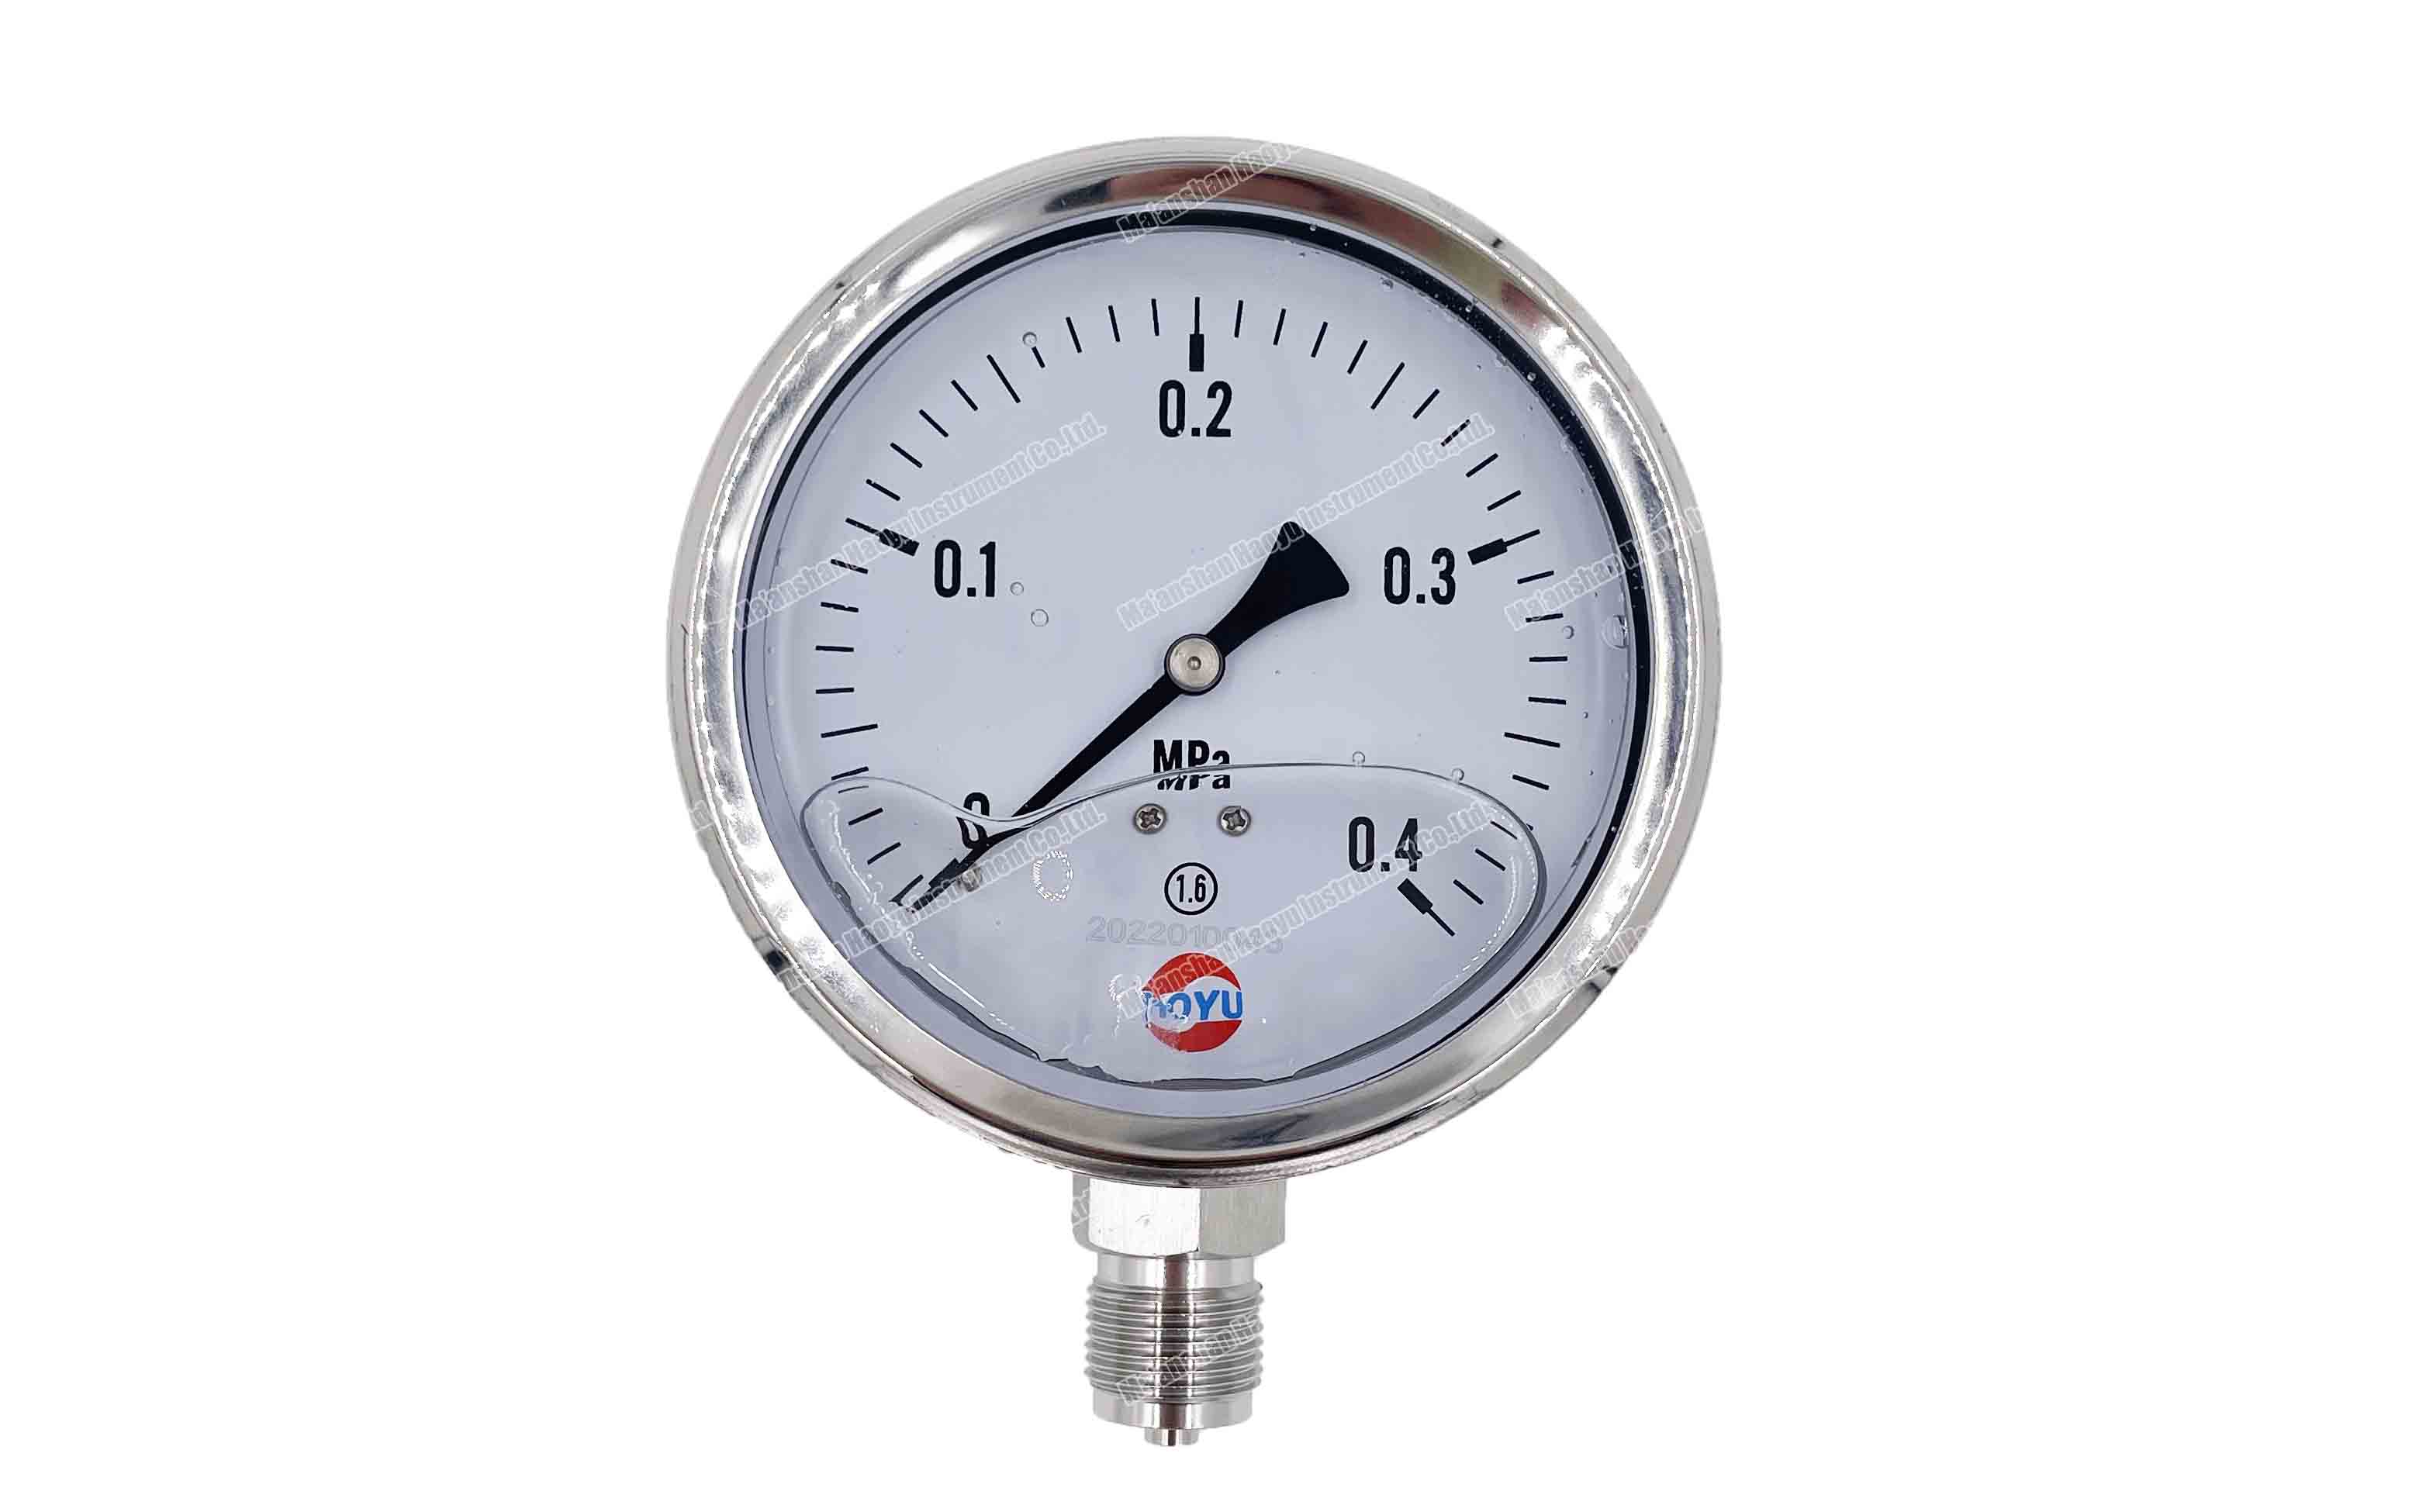 GCE from USA bought a batch of pressure gauges